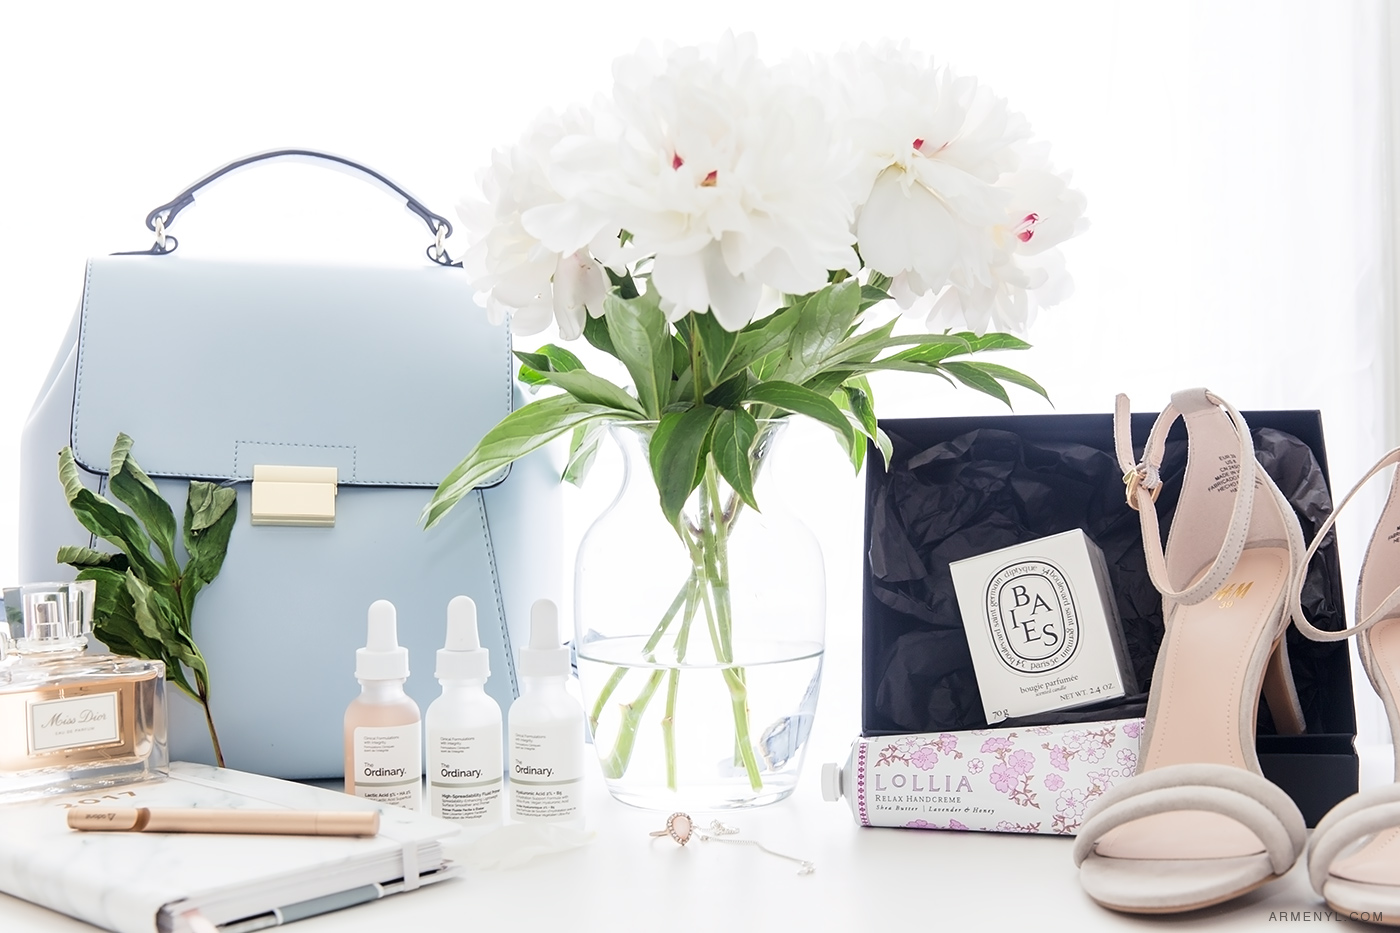 Armenyl favorites Zara Bag, Peonies, Baies Candle Diptyque, The Ordinary skincare, Lolia photographed by Armenyl.com